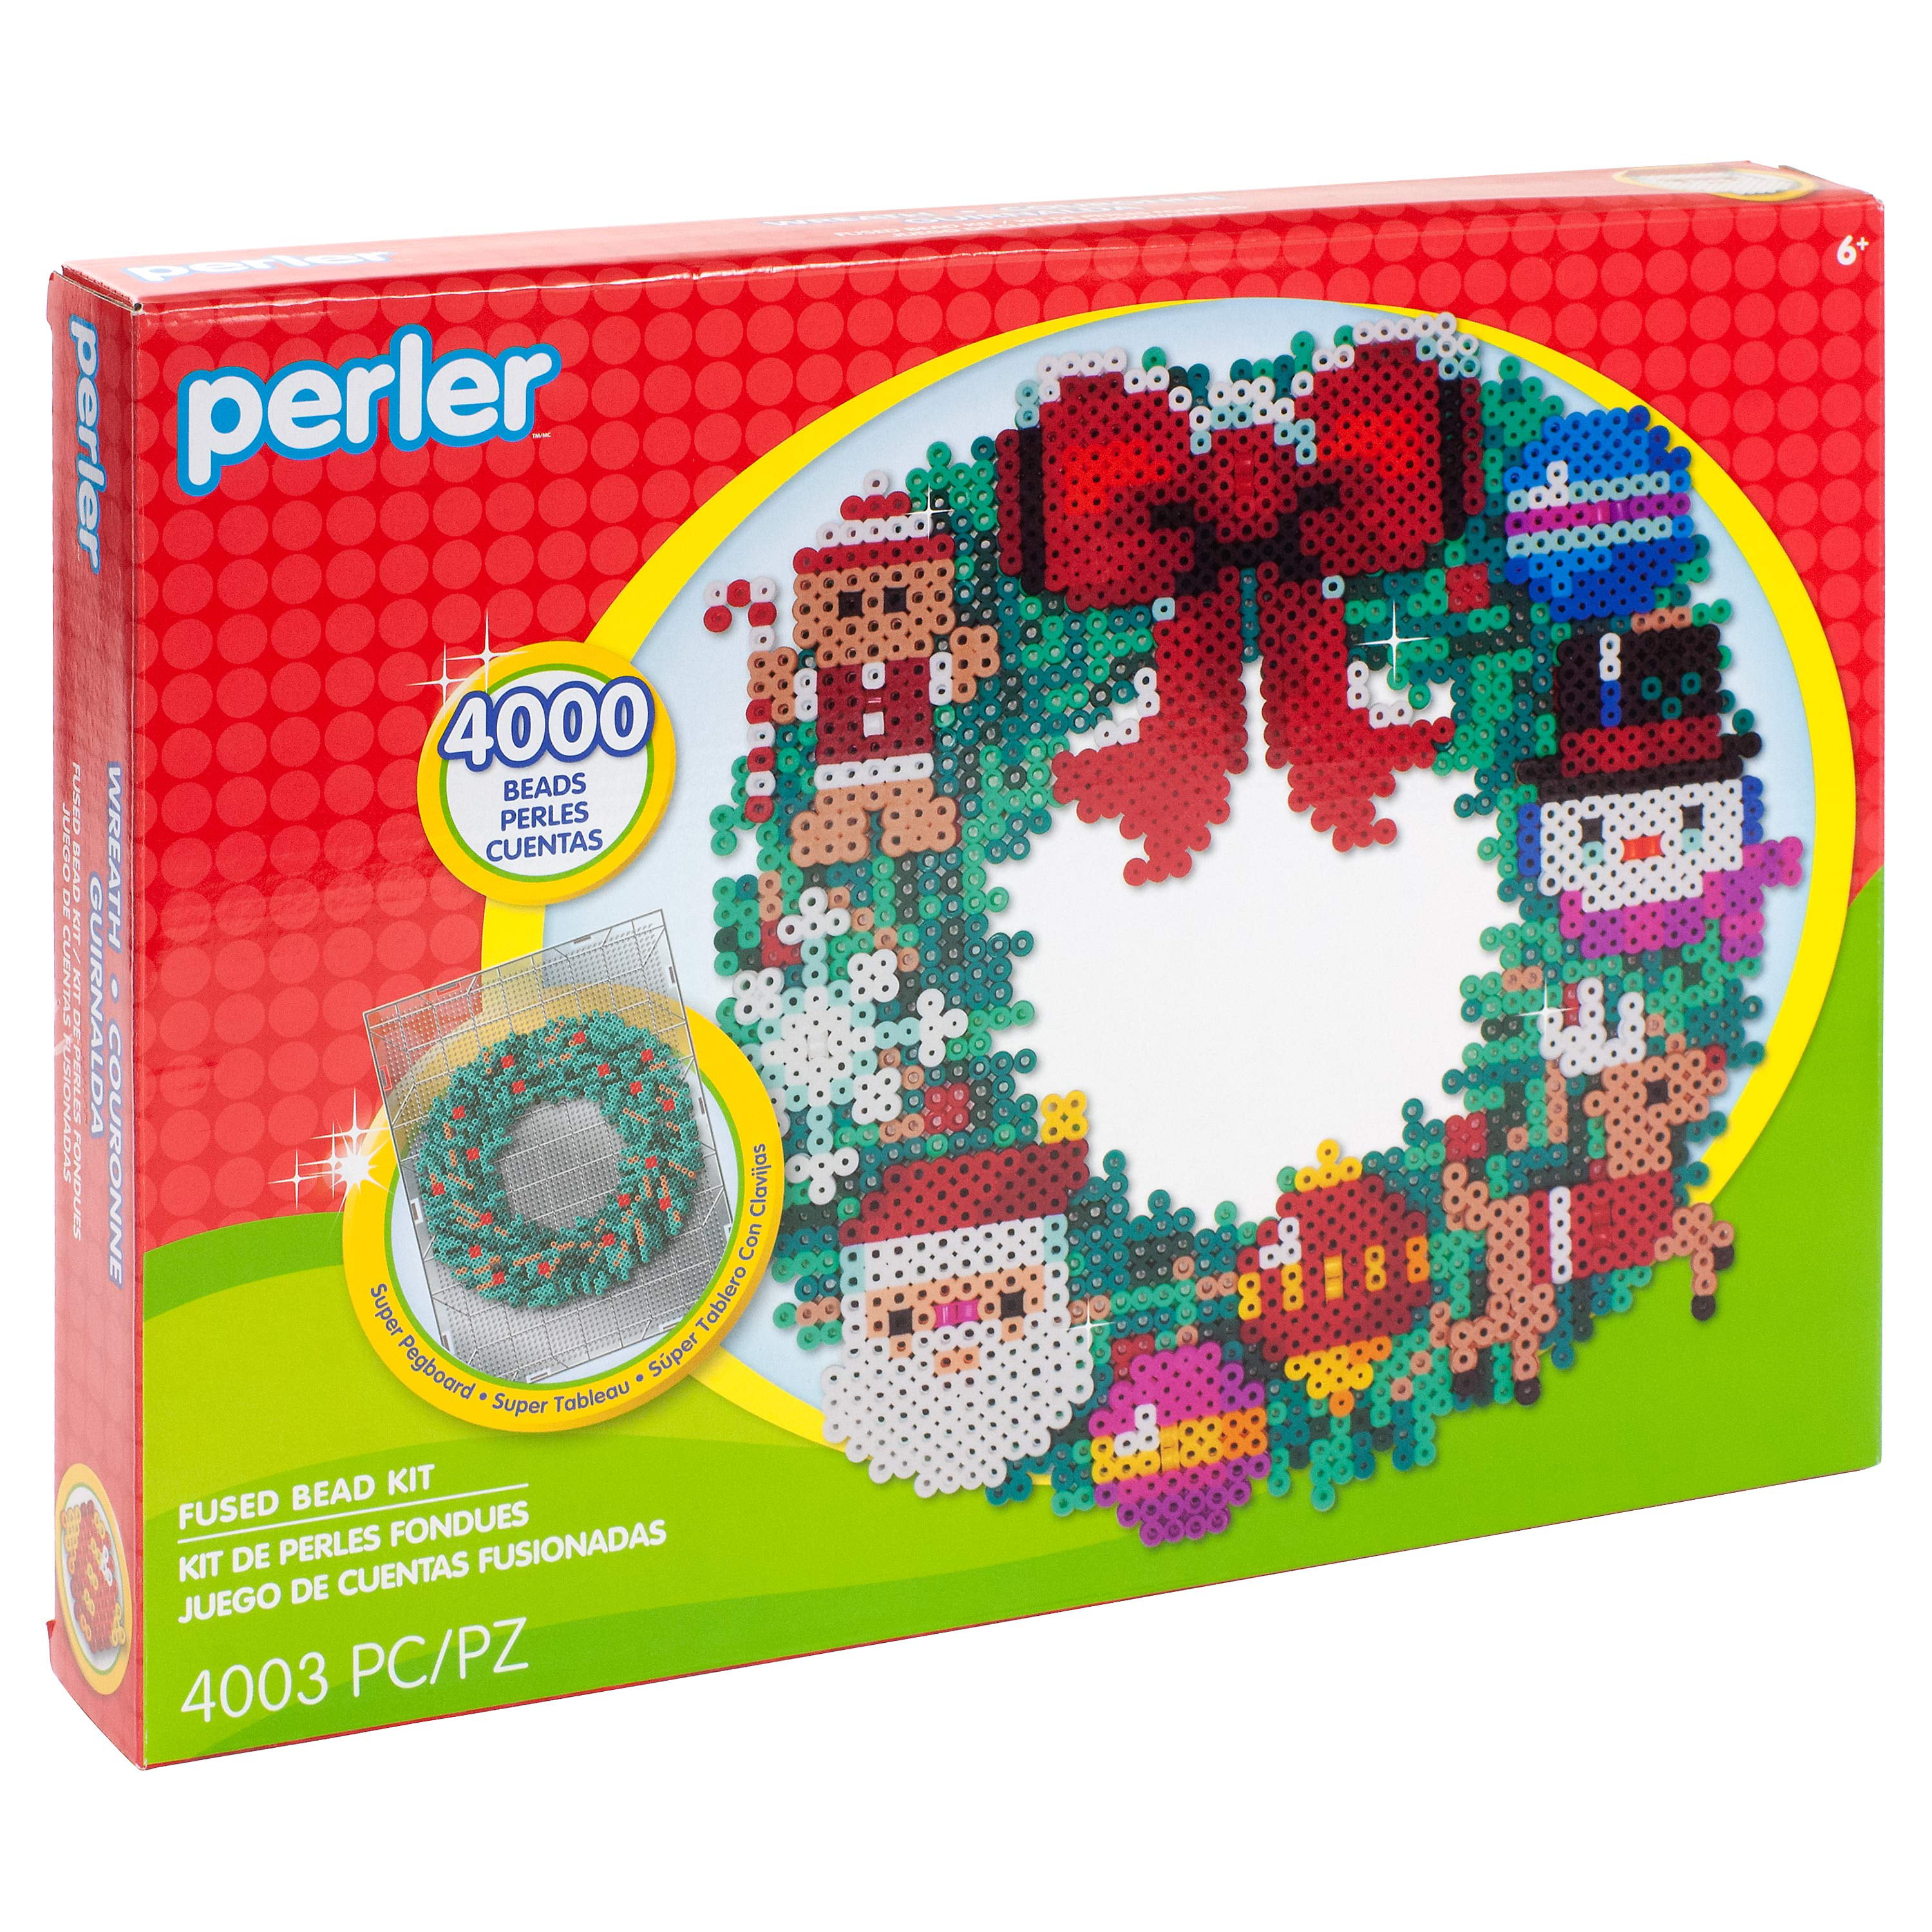 3D Holiday Wreath Fused Bead Kit, Ages 6 up, 4003 Pieces - Walmart.com